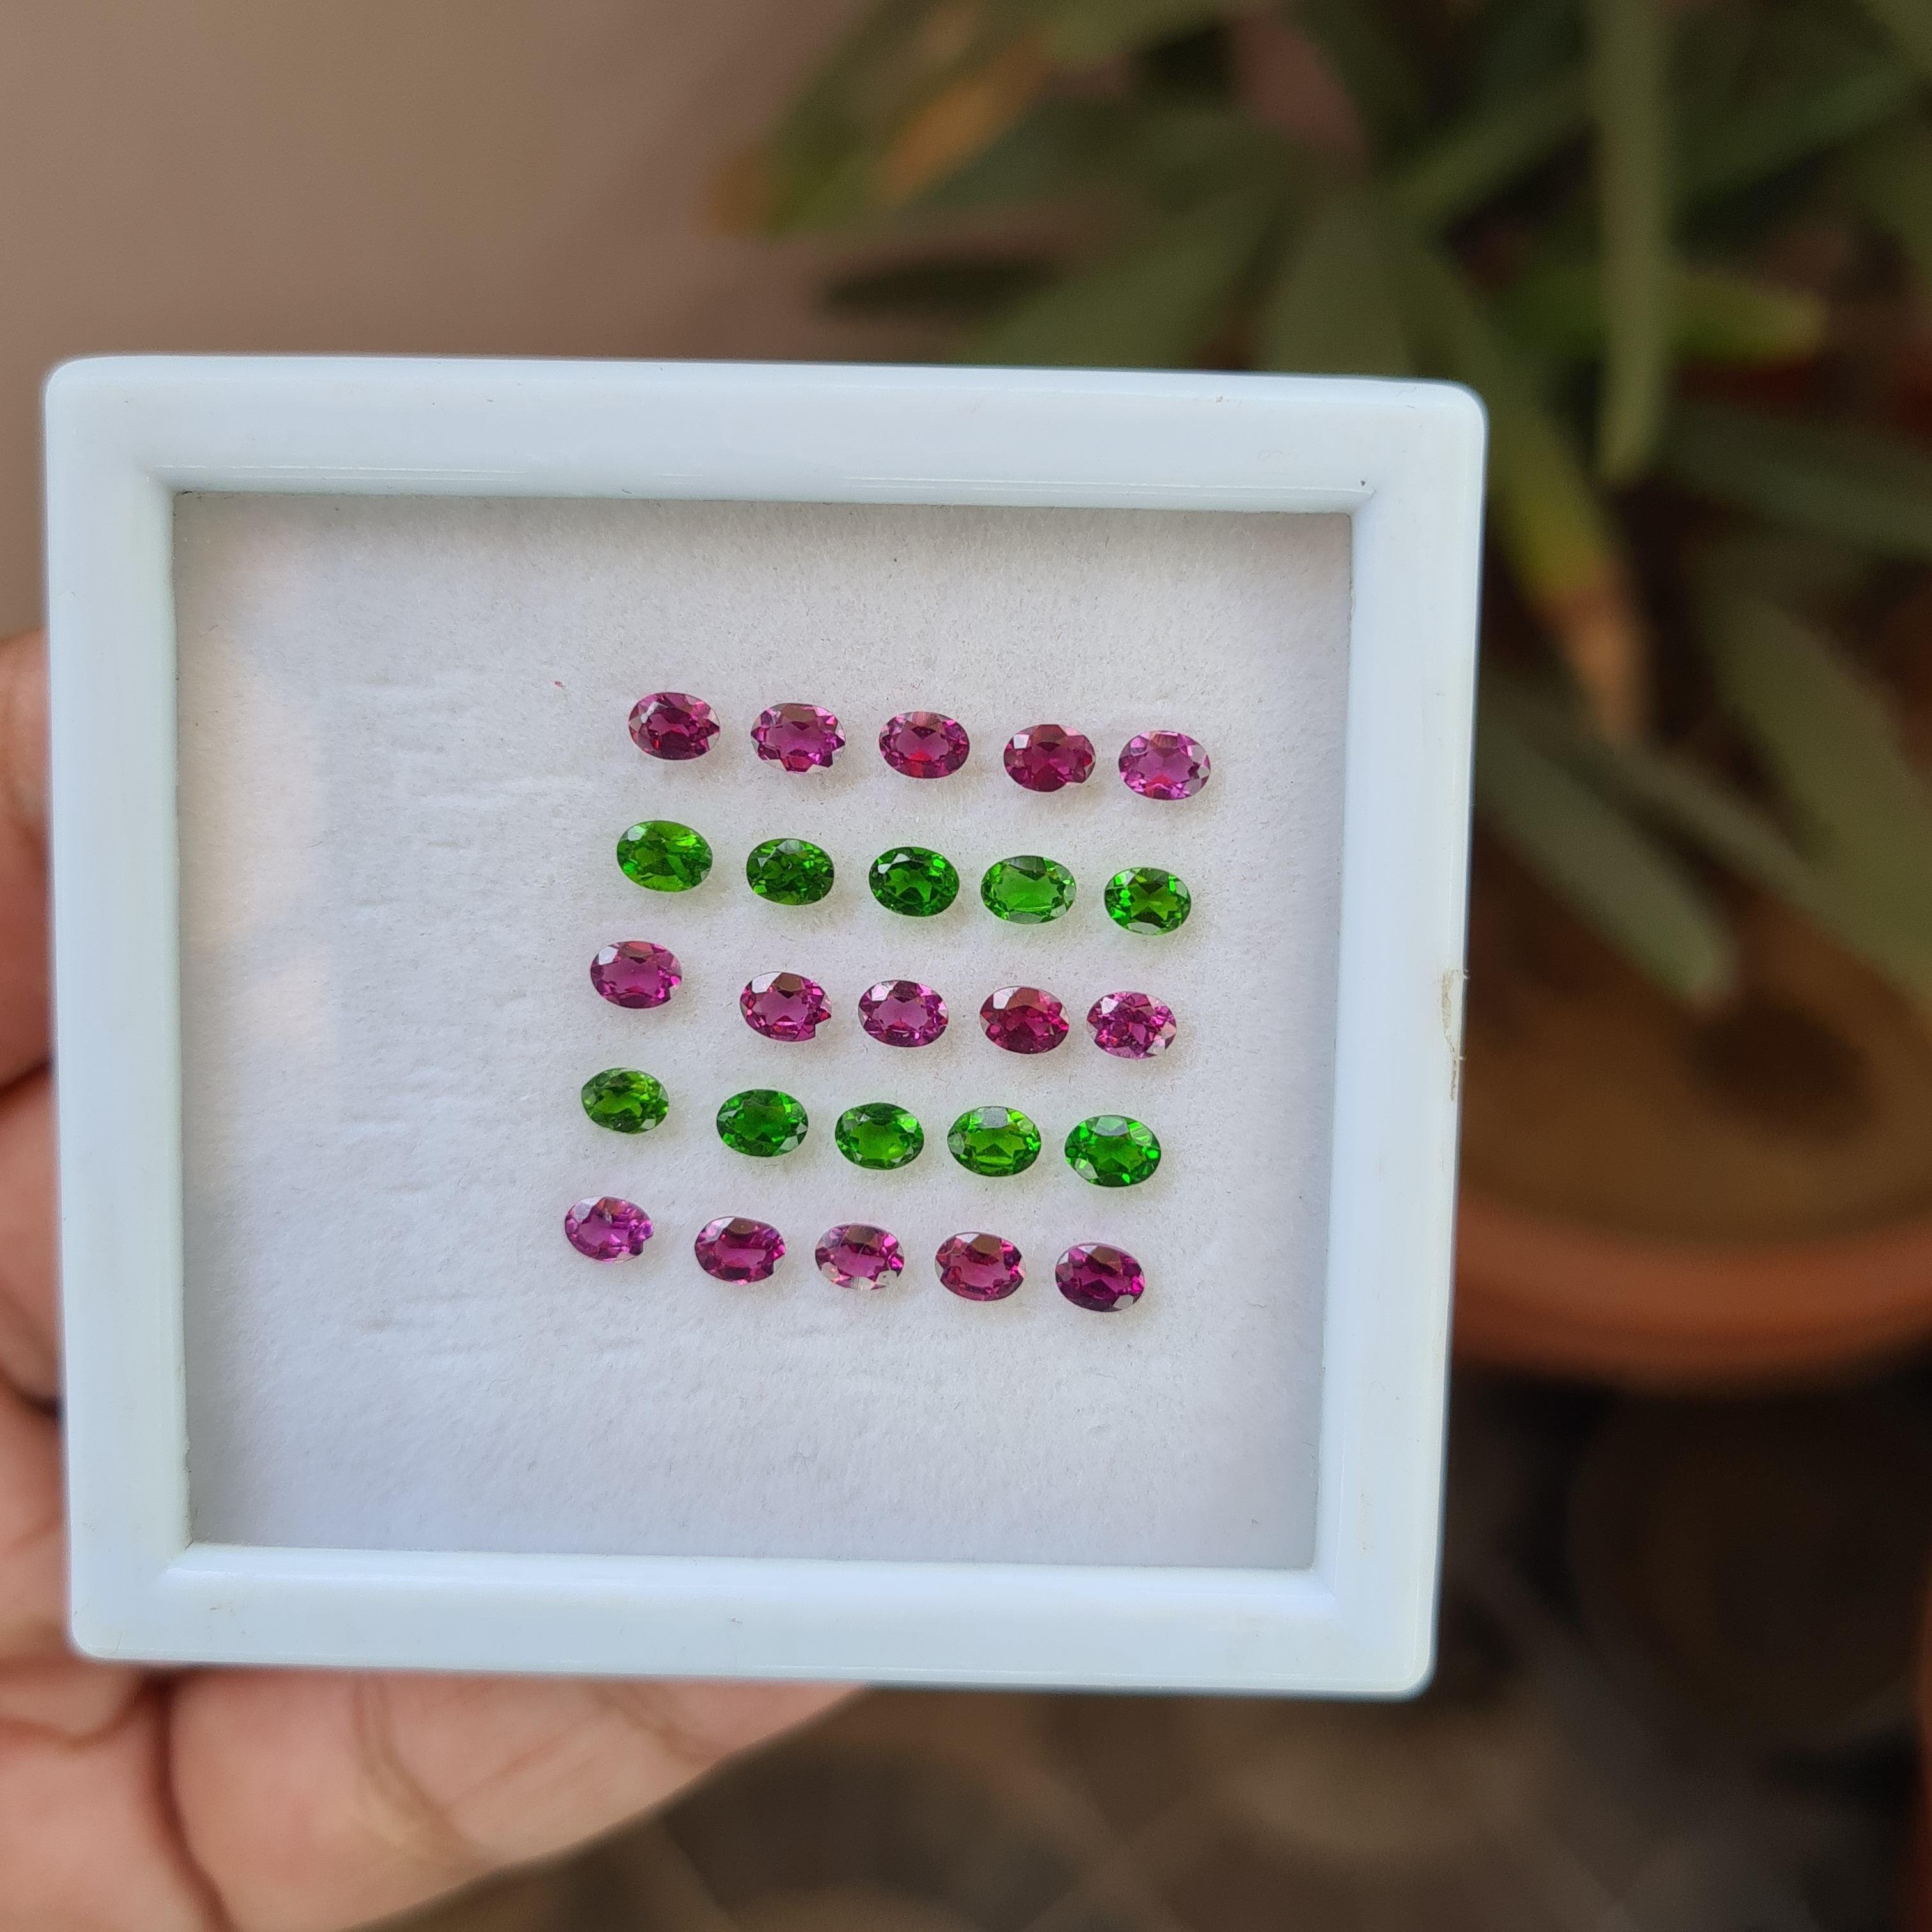 25 Pieces Natural Garnet Faceted Green and Pink Oval Shape , Size: 4x3mm - The LabradoriteKing